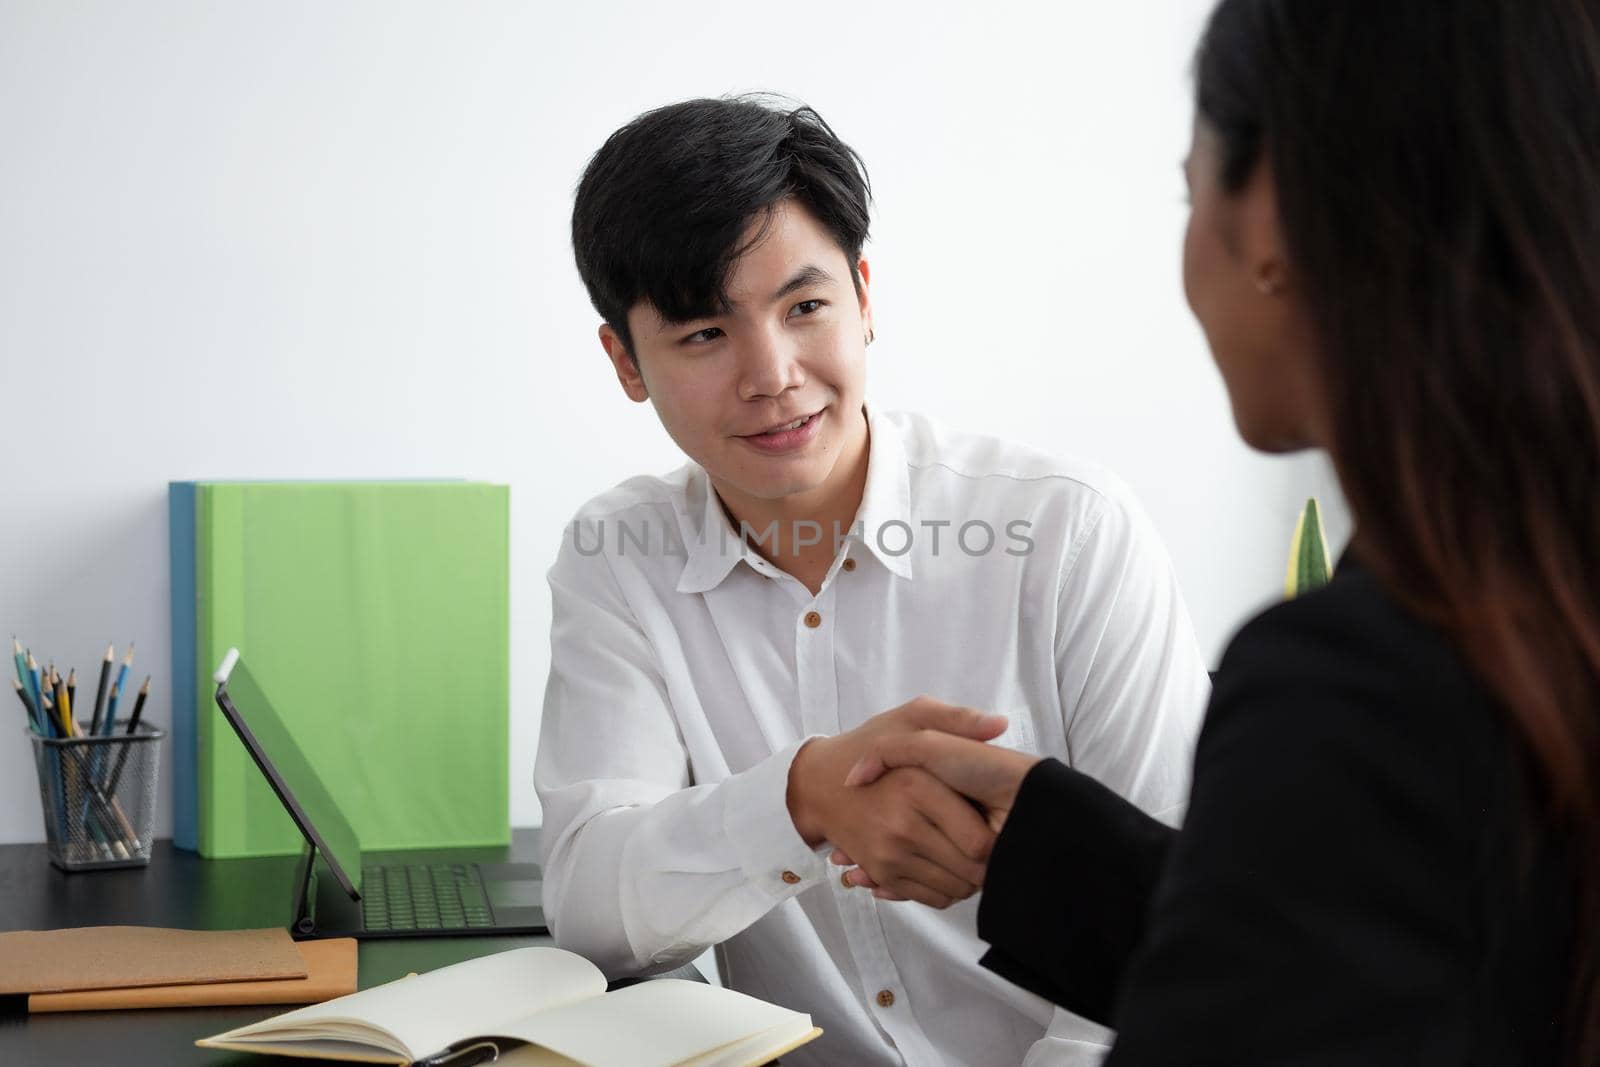 Businessman handshake for teamwork of business merger and acquisition,successful negotiate,hand shake,two businessman shake hand with partner to celebration partnership and business deal concept.